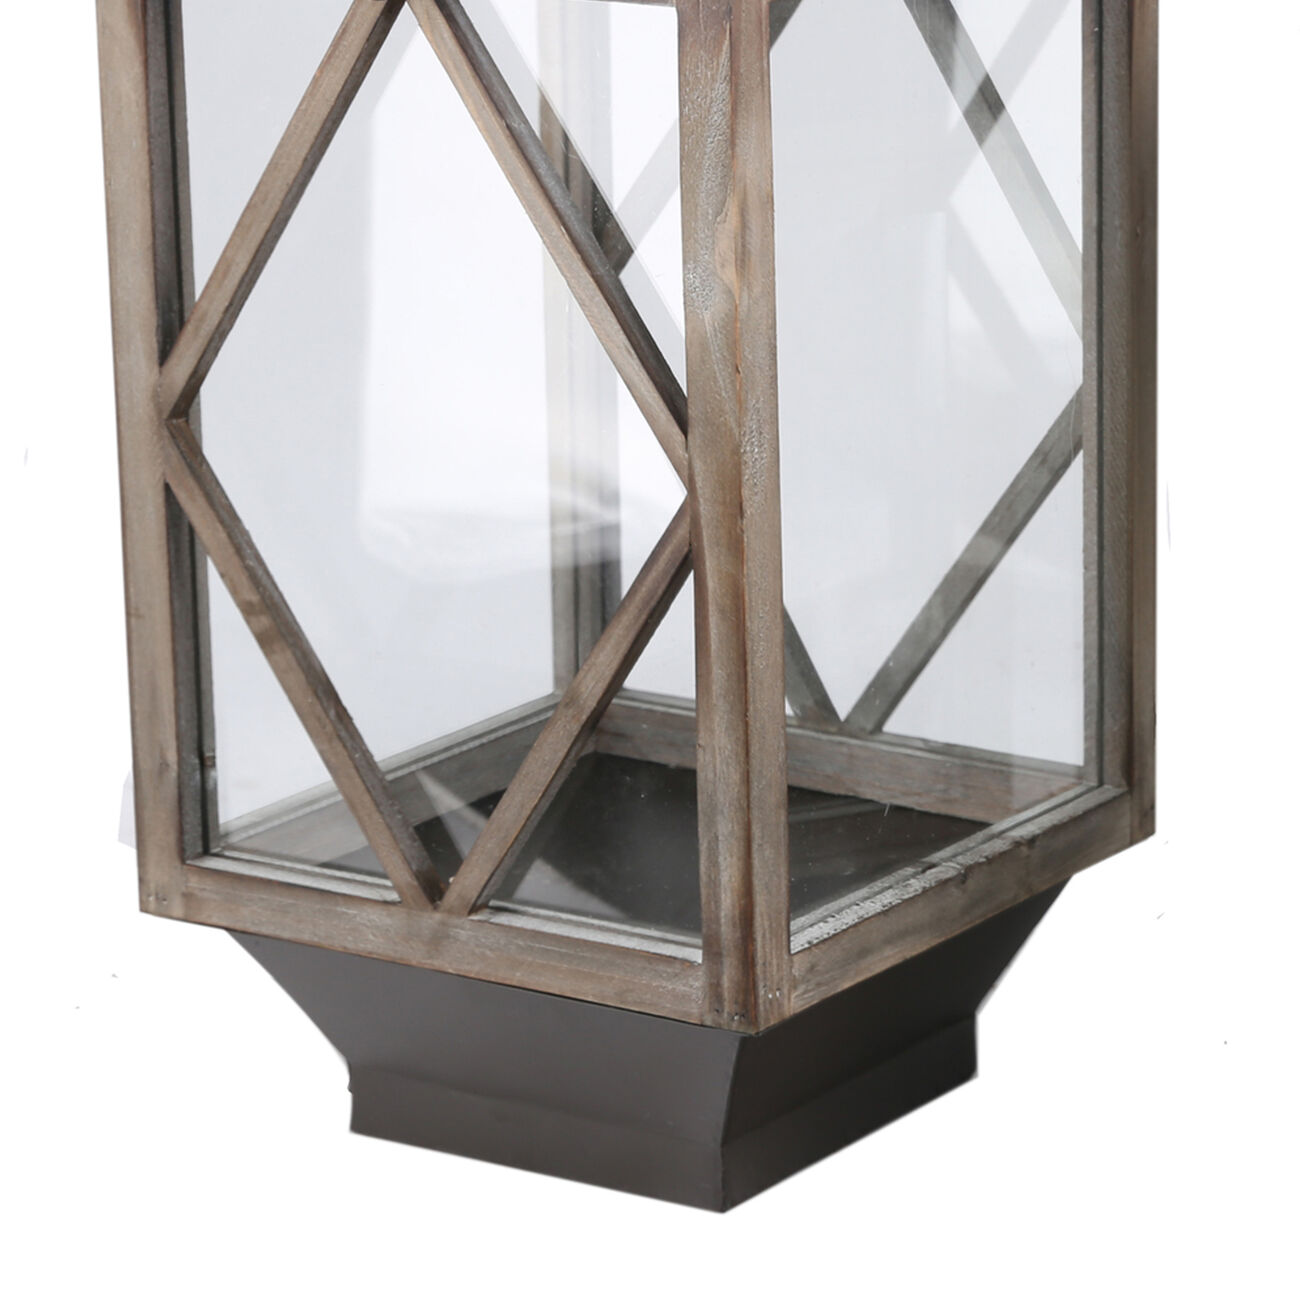 Wood and Metal Lantern with Diamond Body Design, Brown and Black, Set of 2